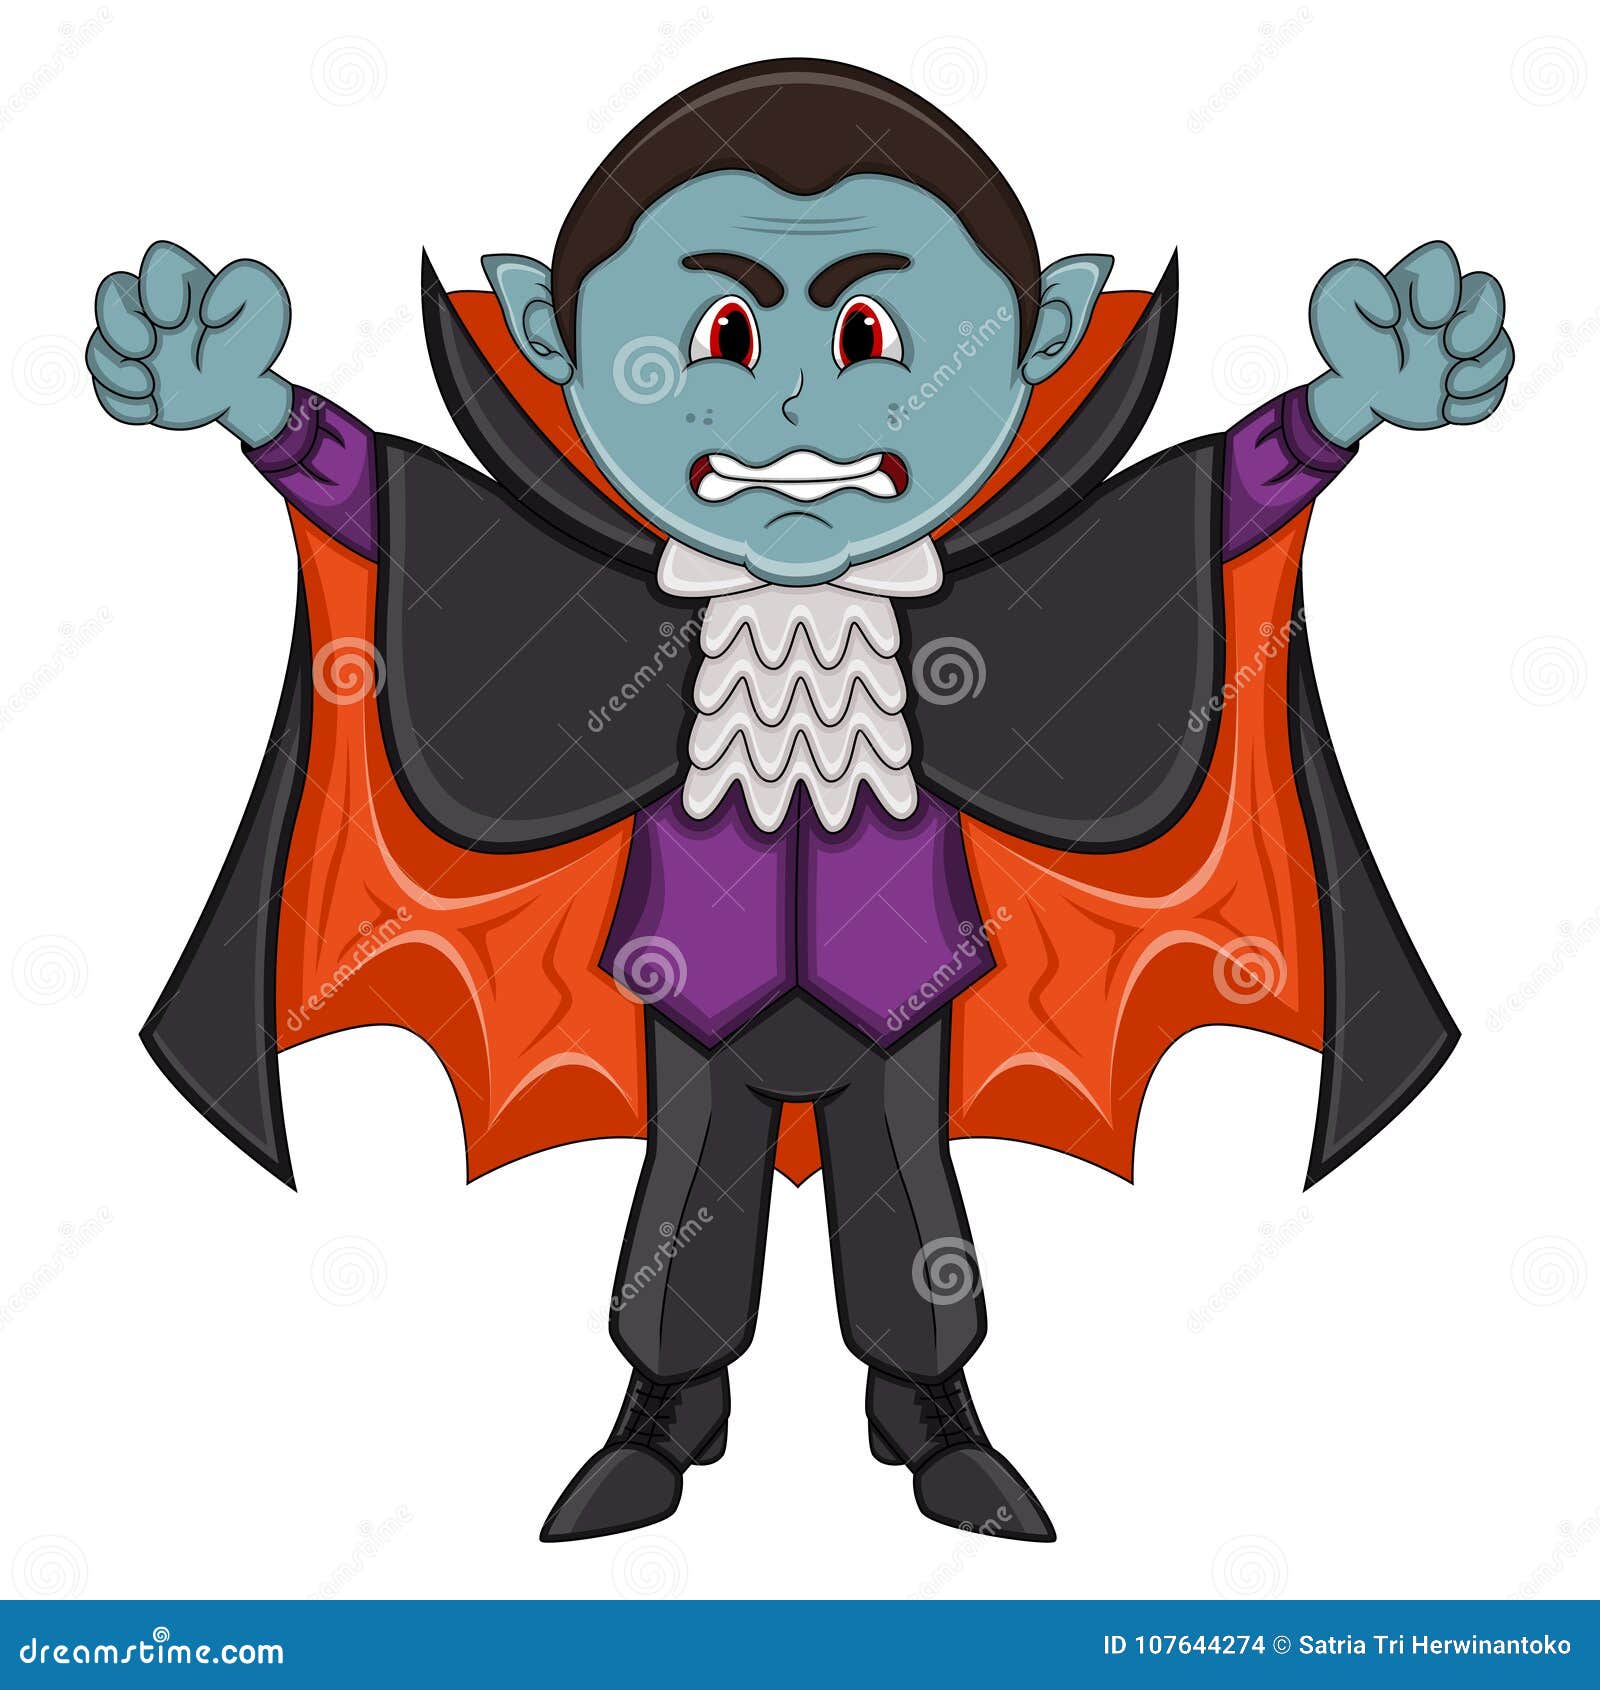 Cute Vampire Cartoon with Smile Stock Vector - Illustration of fangs, cape:  107644274